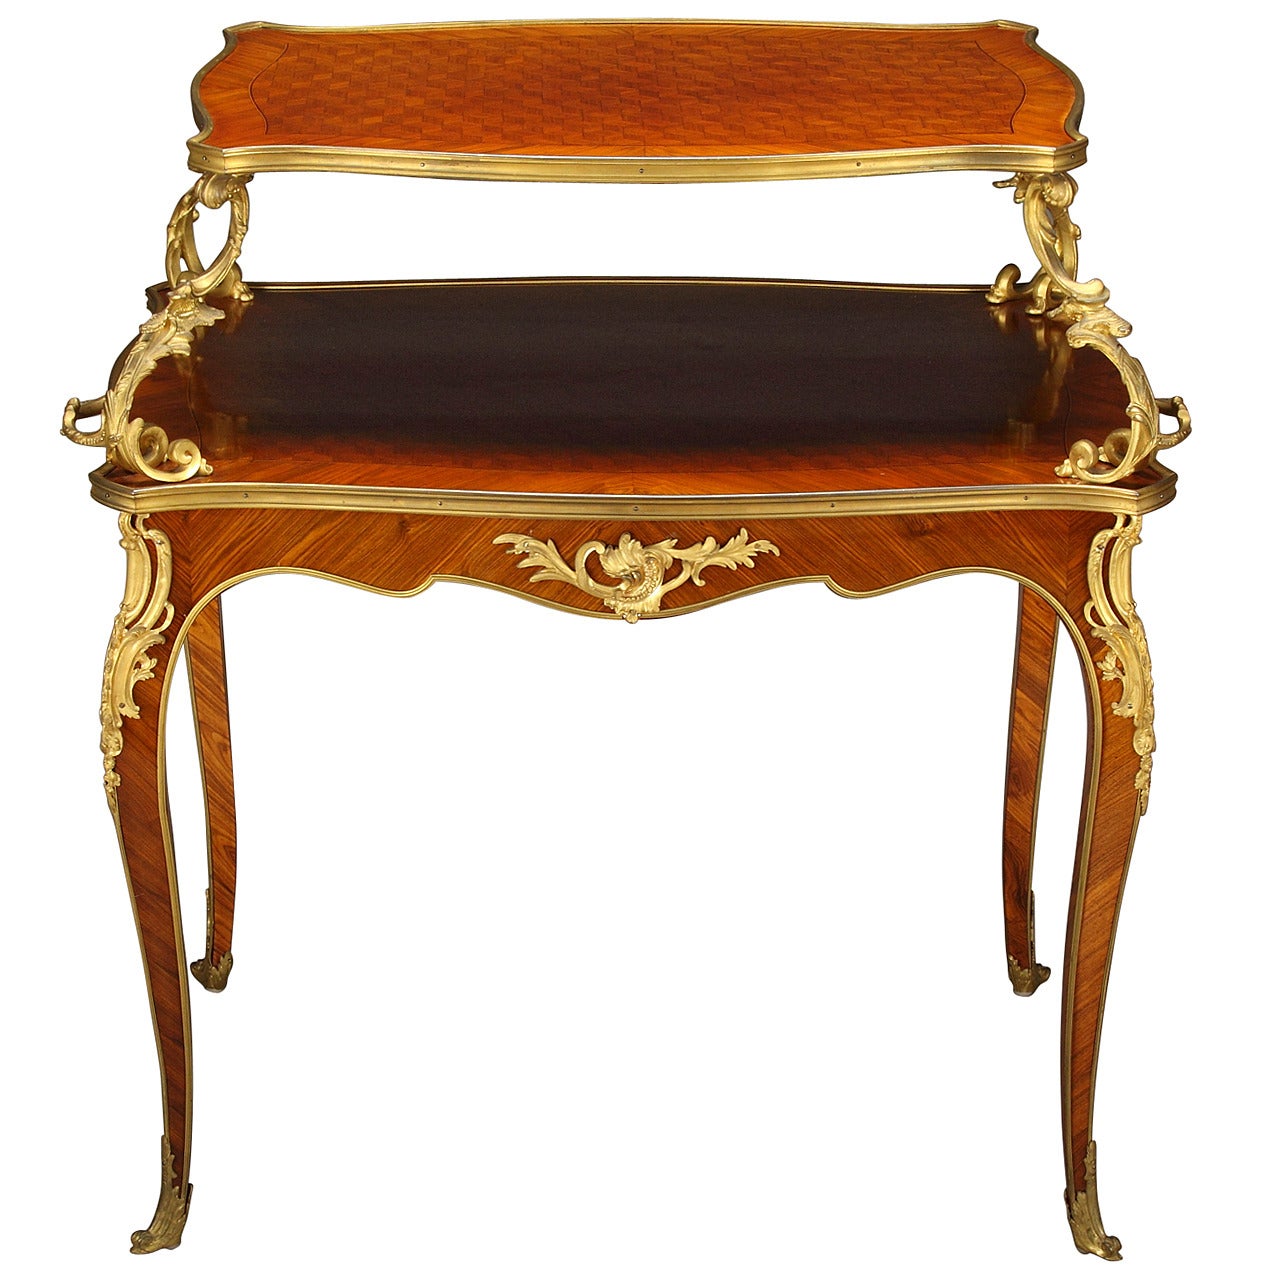 French Gilt Bronze Mounted Parquetry Two-Tier Tea Table